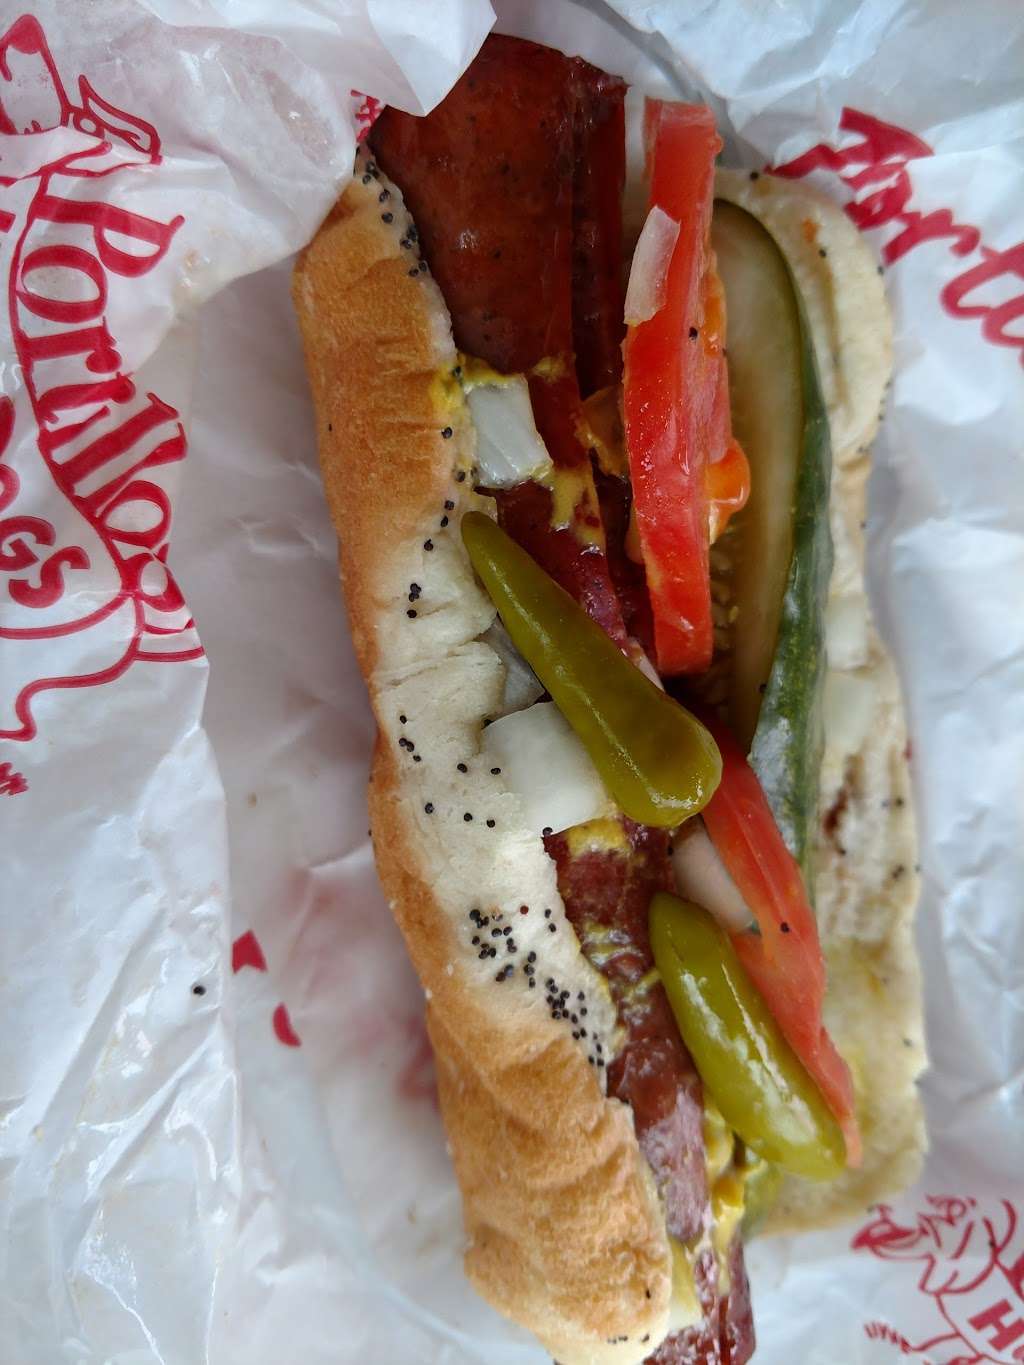 Portillos Hot Dogs | 7195 Kingery Hwy, Willowbrook, IL 60527 | Phone: (630) 789-0909